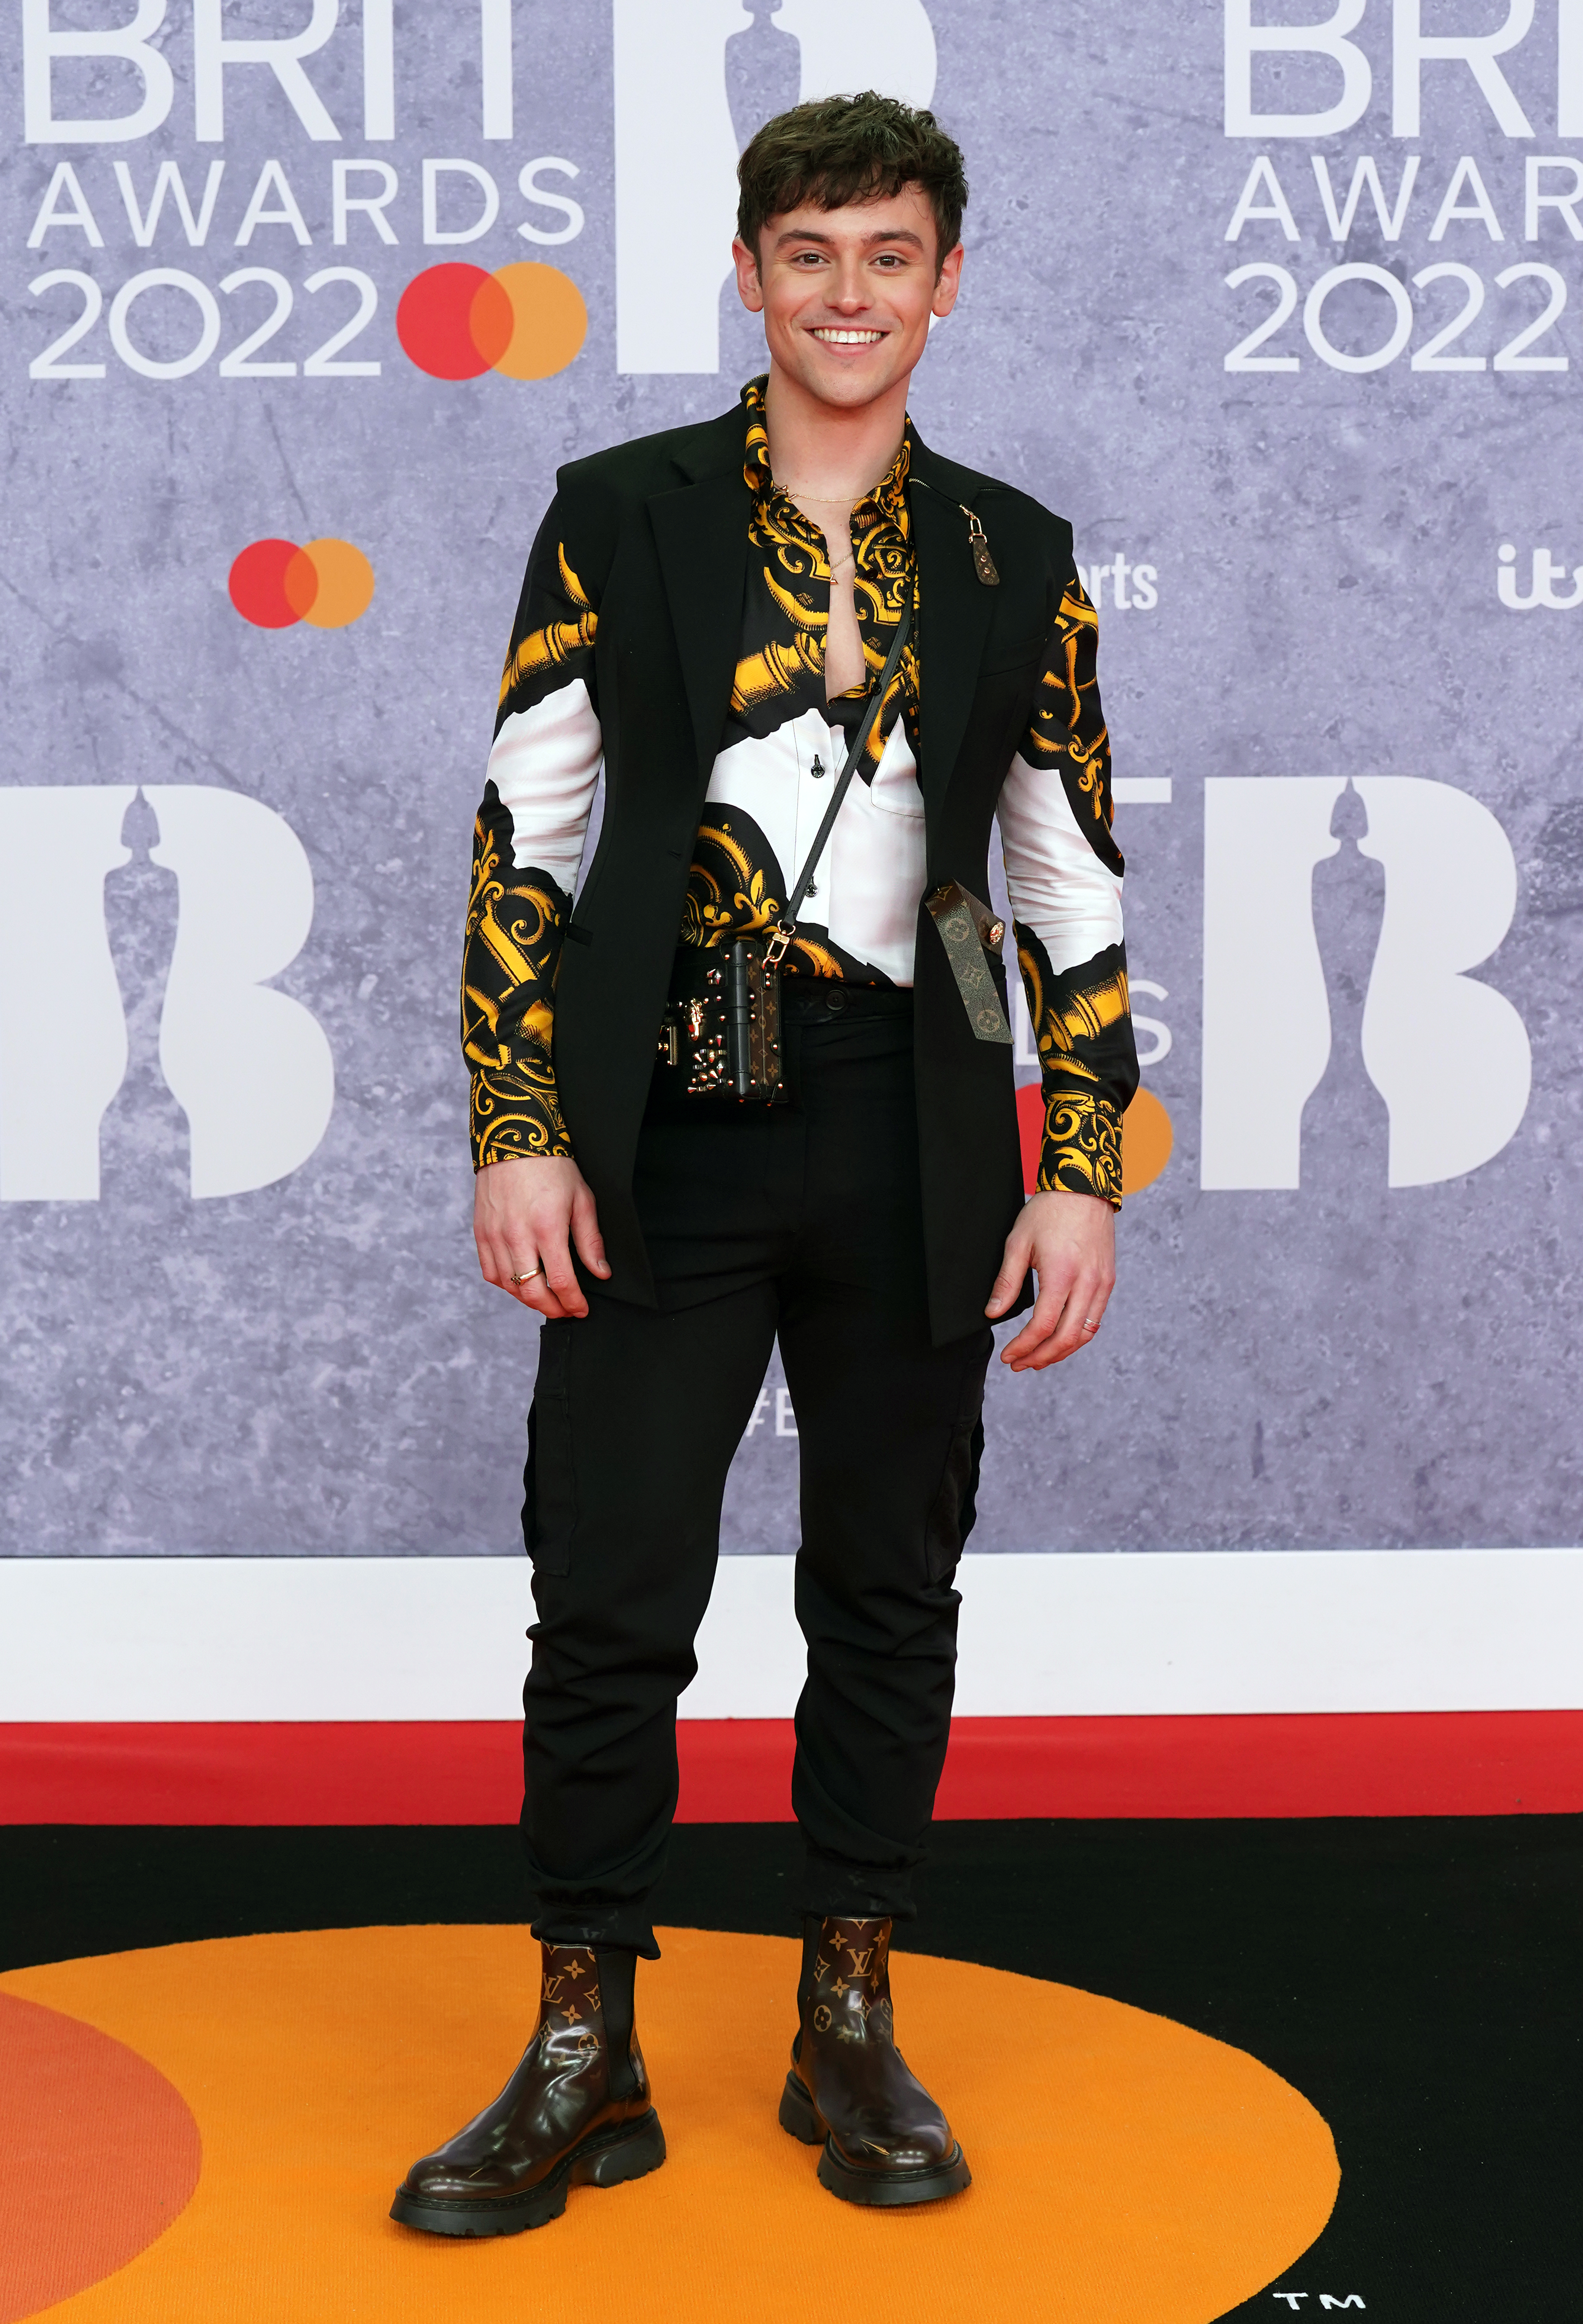 Tom Daley attending the Brit Awards 2022